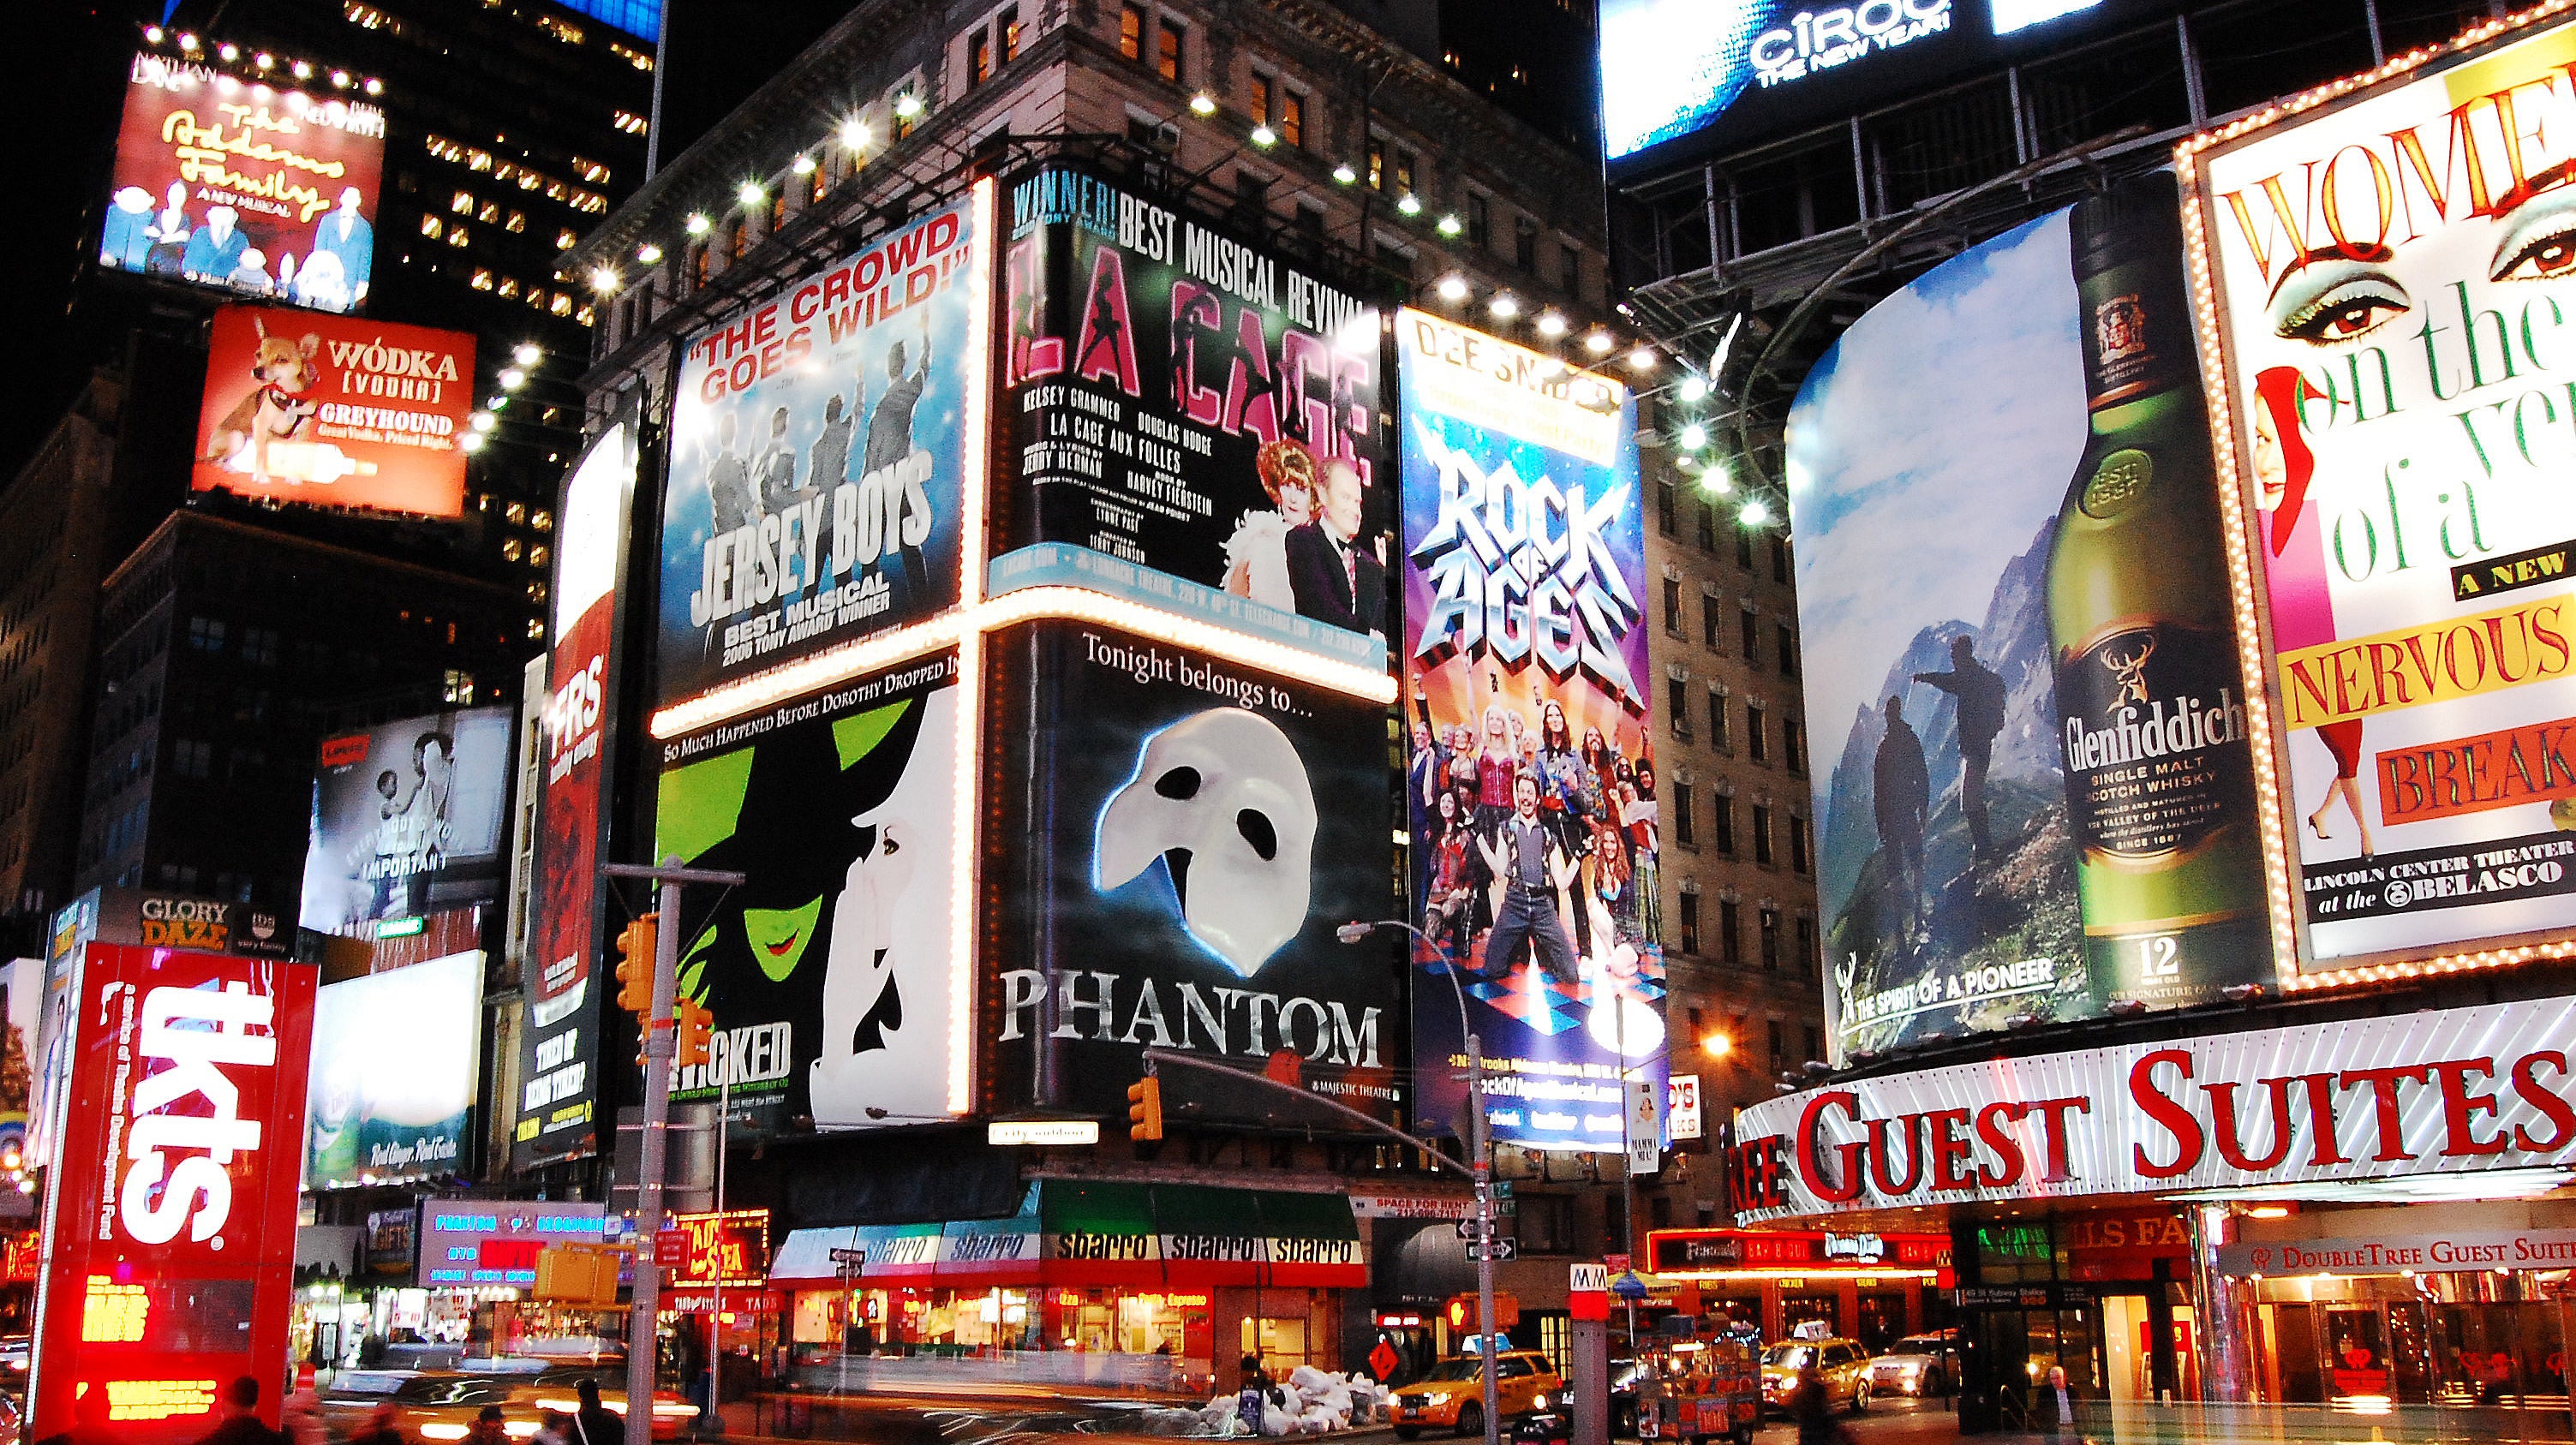 How To Watch Broadway Shows Like Cats, And Sweeney Todd At Home For Free